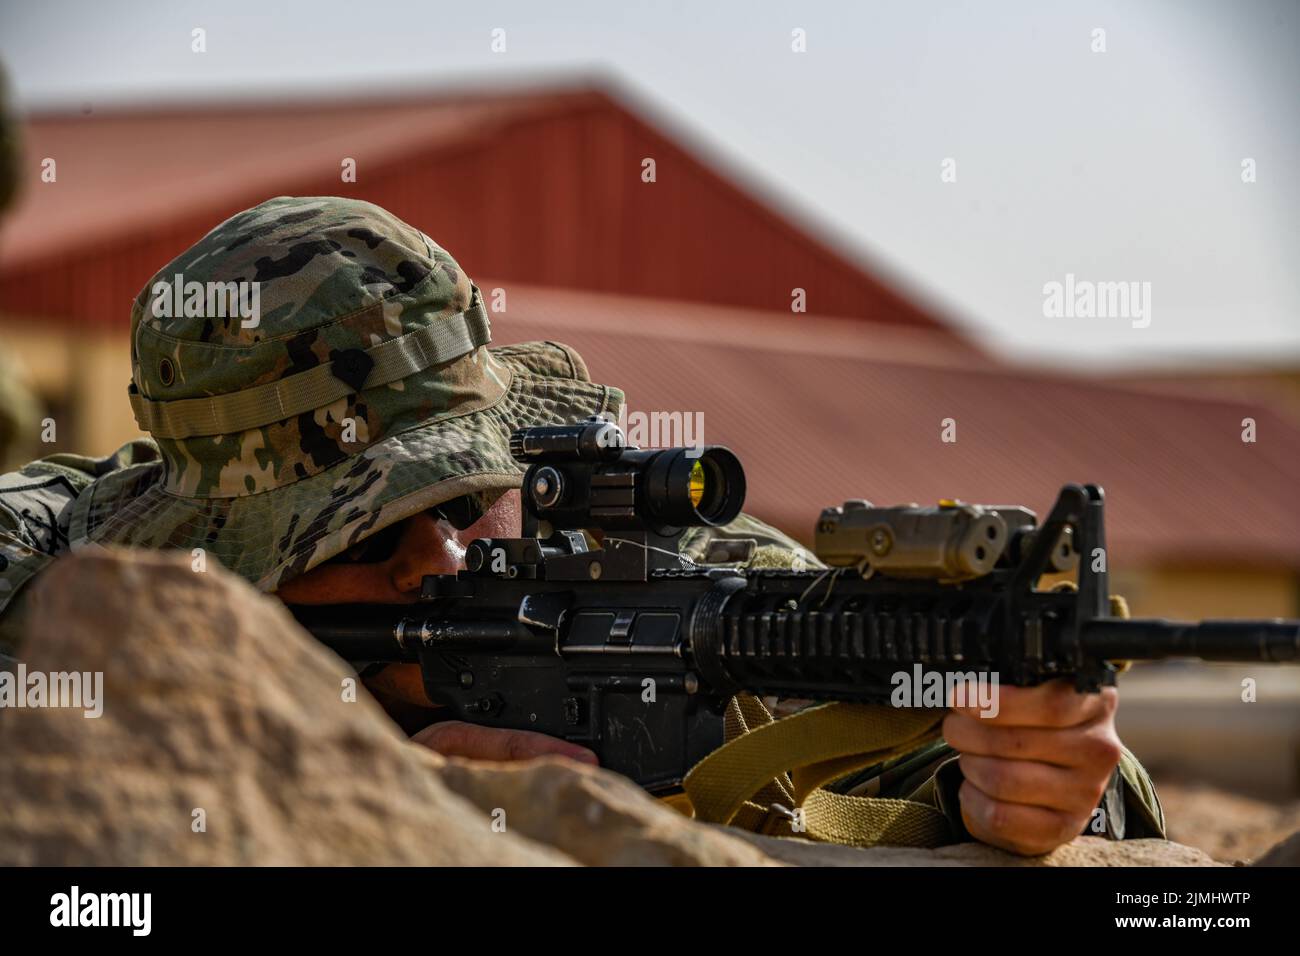 A U.S. Soldier assigned to Task Force Hurricane holds security during a platoon immersion in Al-Kharj, Kingdom of Saudi Arabia, June 12, 2022. The immersion was a training event meant to build interoperability between the U.S Army and RSLF at the platoon level while enhancing both U.S. and partner nation skillsets. (U.S. Air Force photo by Staff Sgt. Noah J. Tancer) Stock Photo